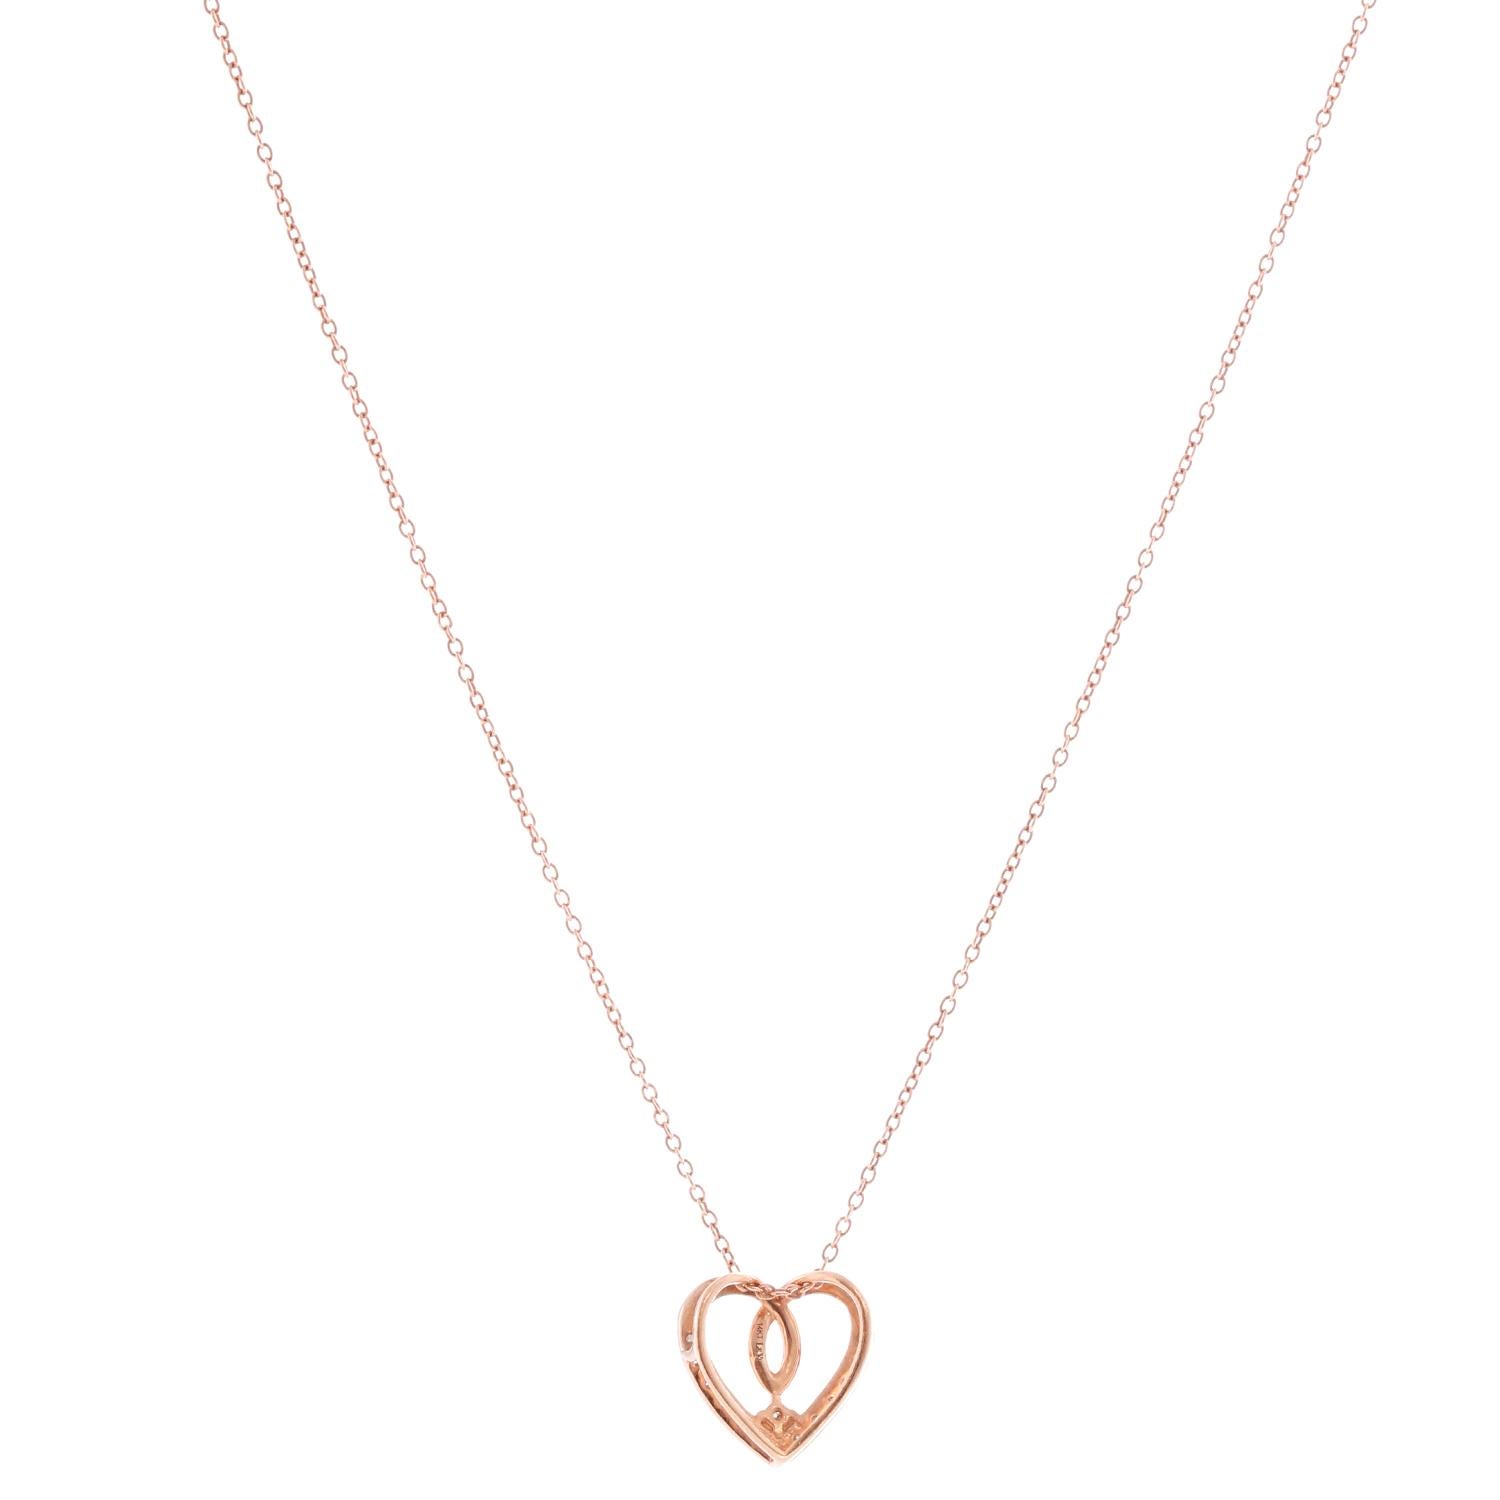 Le Vian 14K Rose Gold Heart Diamond Necklace - Beautiful 1/2 ct. heart measuring 1/4 of an inch on a 19 inch rose gold necklace. Elegant and perfect for every day wear. Hallmarks: Designer mark and 14K . 